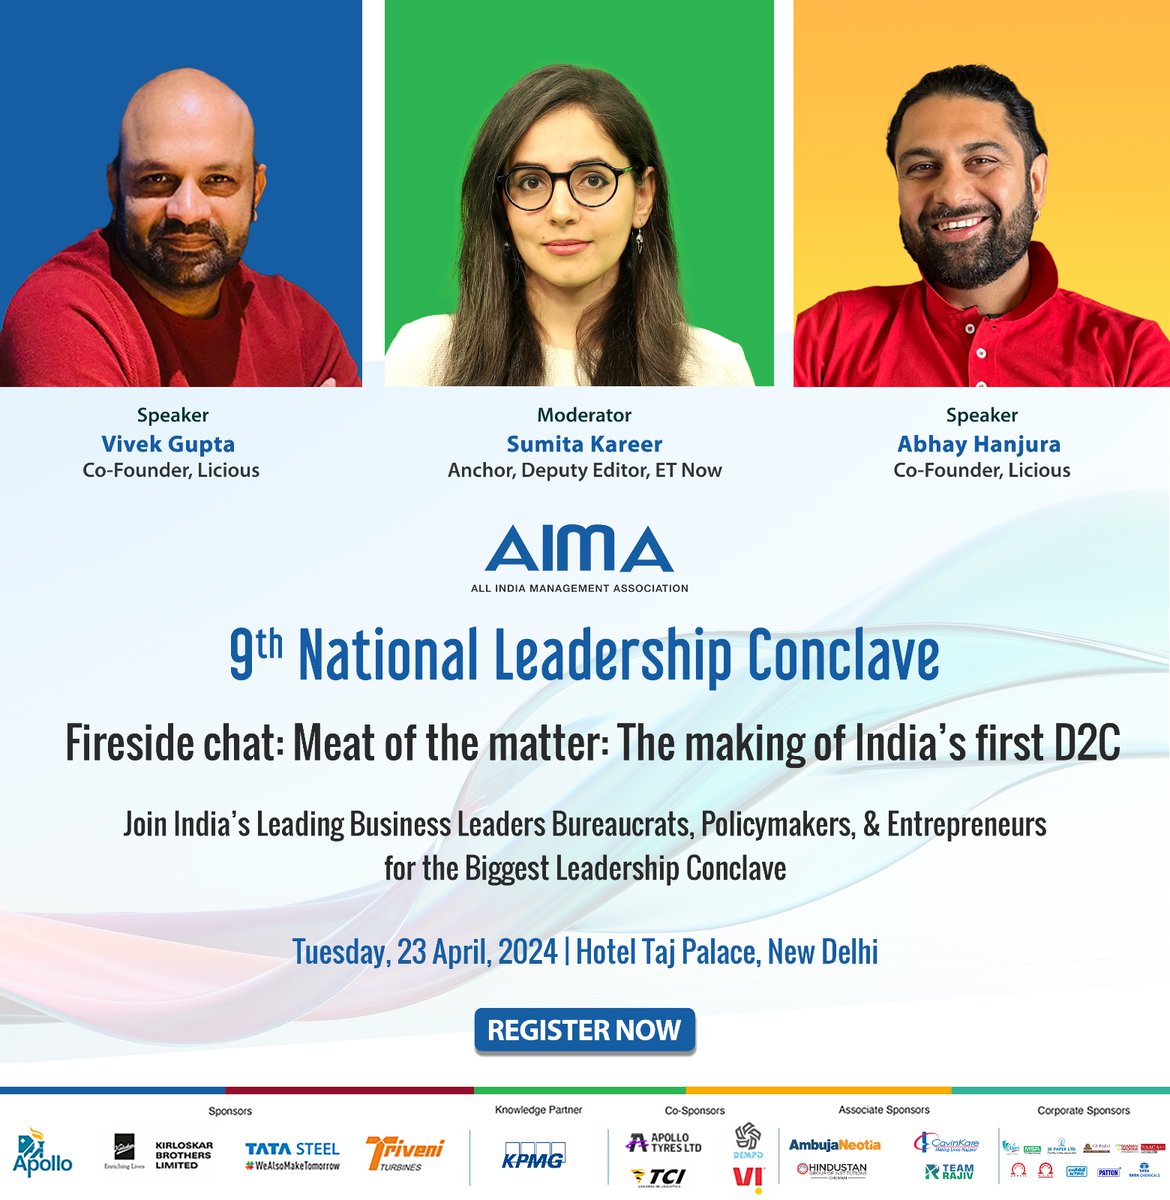 They made meat and seafood accessible to India's aspirational consumers through e-commerce, ensuring safety and quality. Now, let's hear their story firsthand! Join us to listen to @vivekgca & @abhayhanjura, Co-Founders, @LiciousFoods in conversation with @SumitaKareer, Anchor,